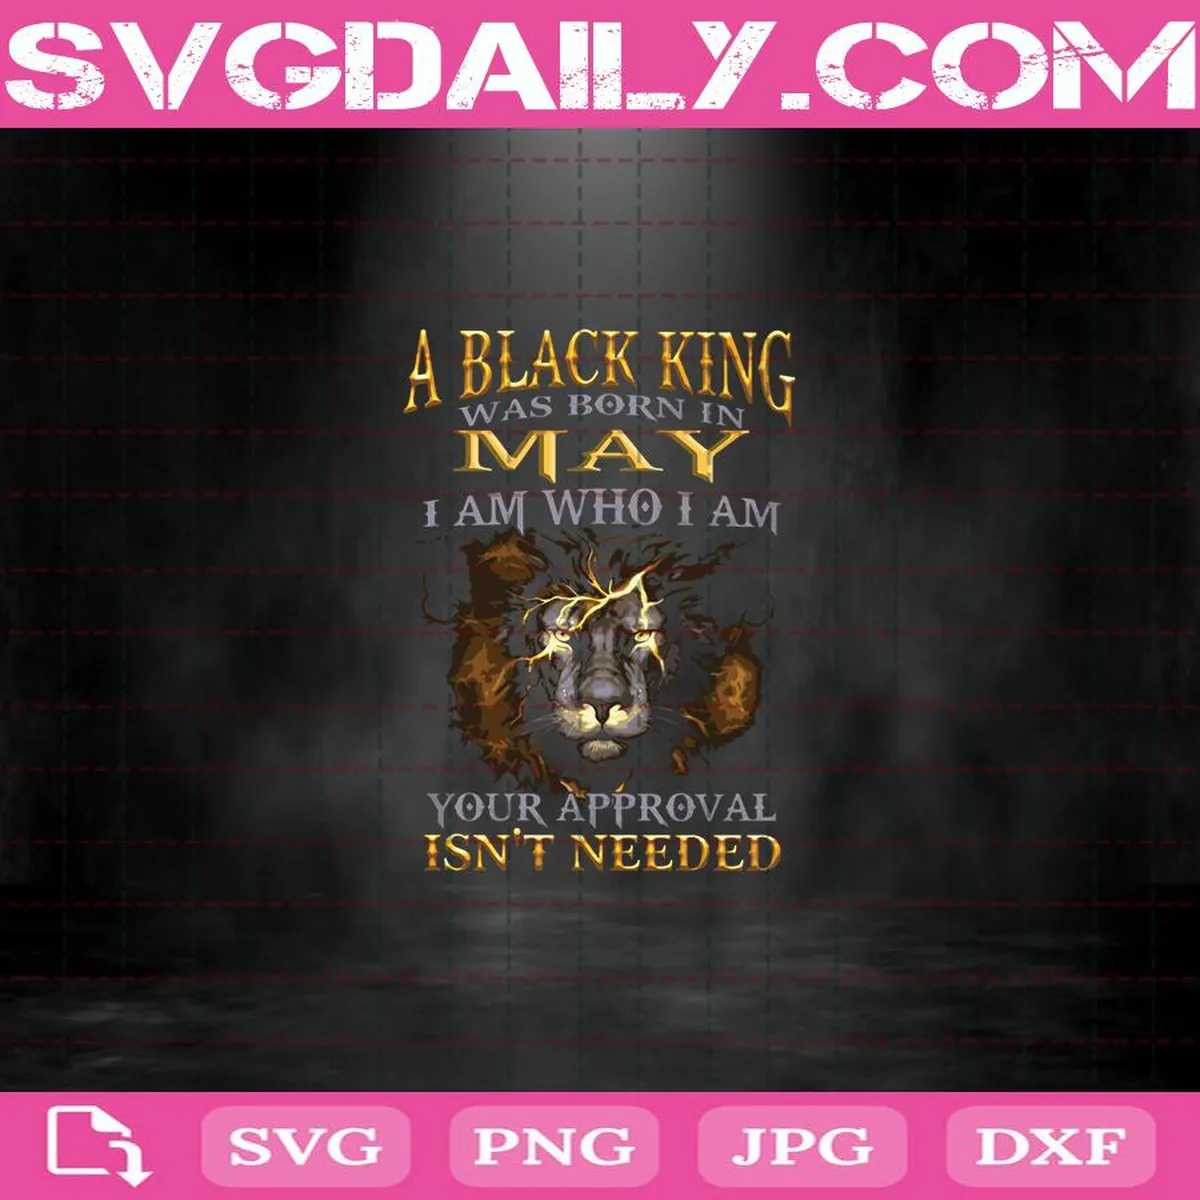 A Black King Was Born In May I Am Who I Am Your Approval Isn't Needed Svg, Black King Svg, May Svg, May King Svg, Born In May Svg, Birthday Svg